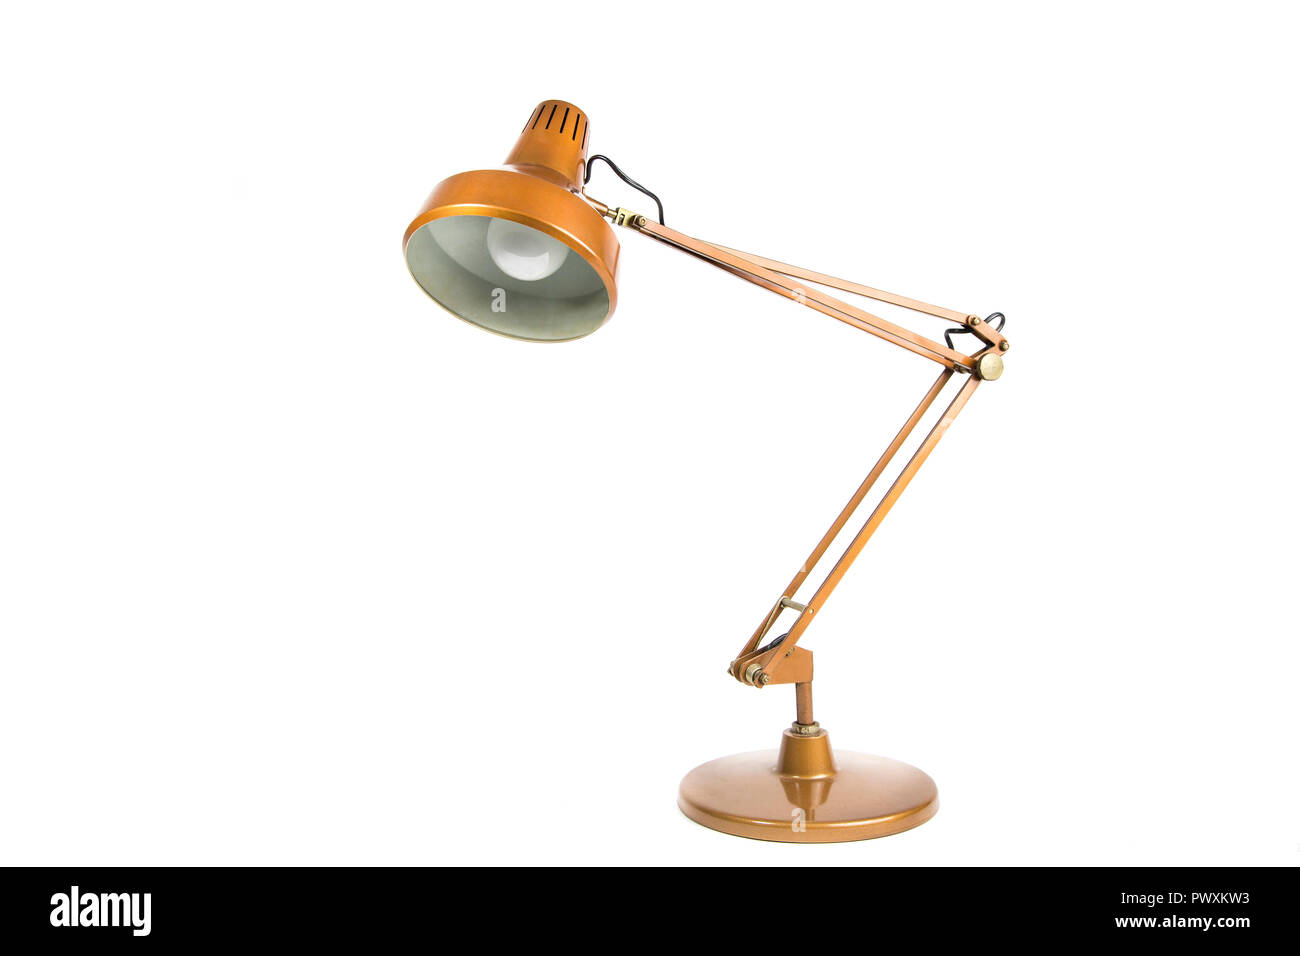 old metallic copper colored table lamp on white background Stock Photo